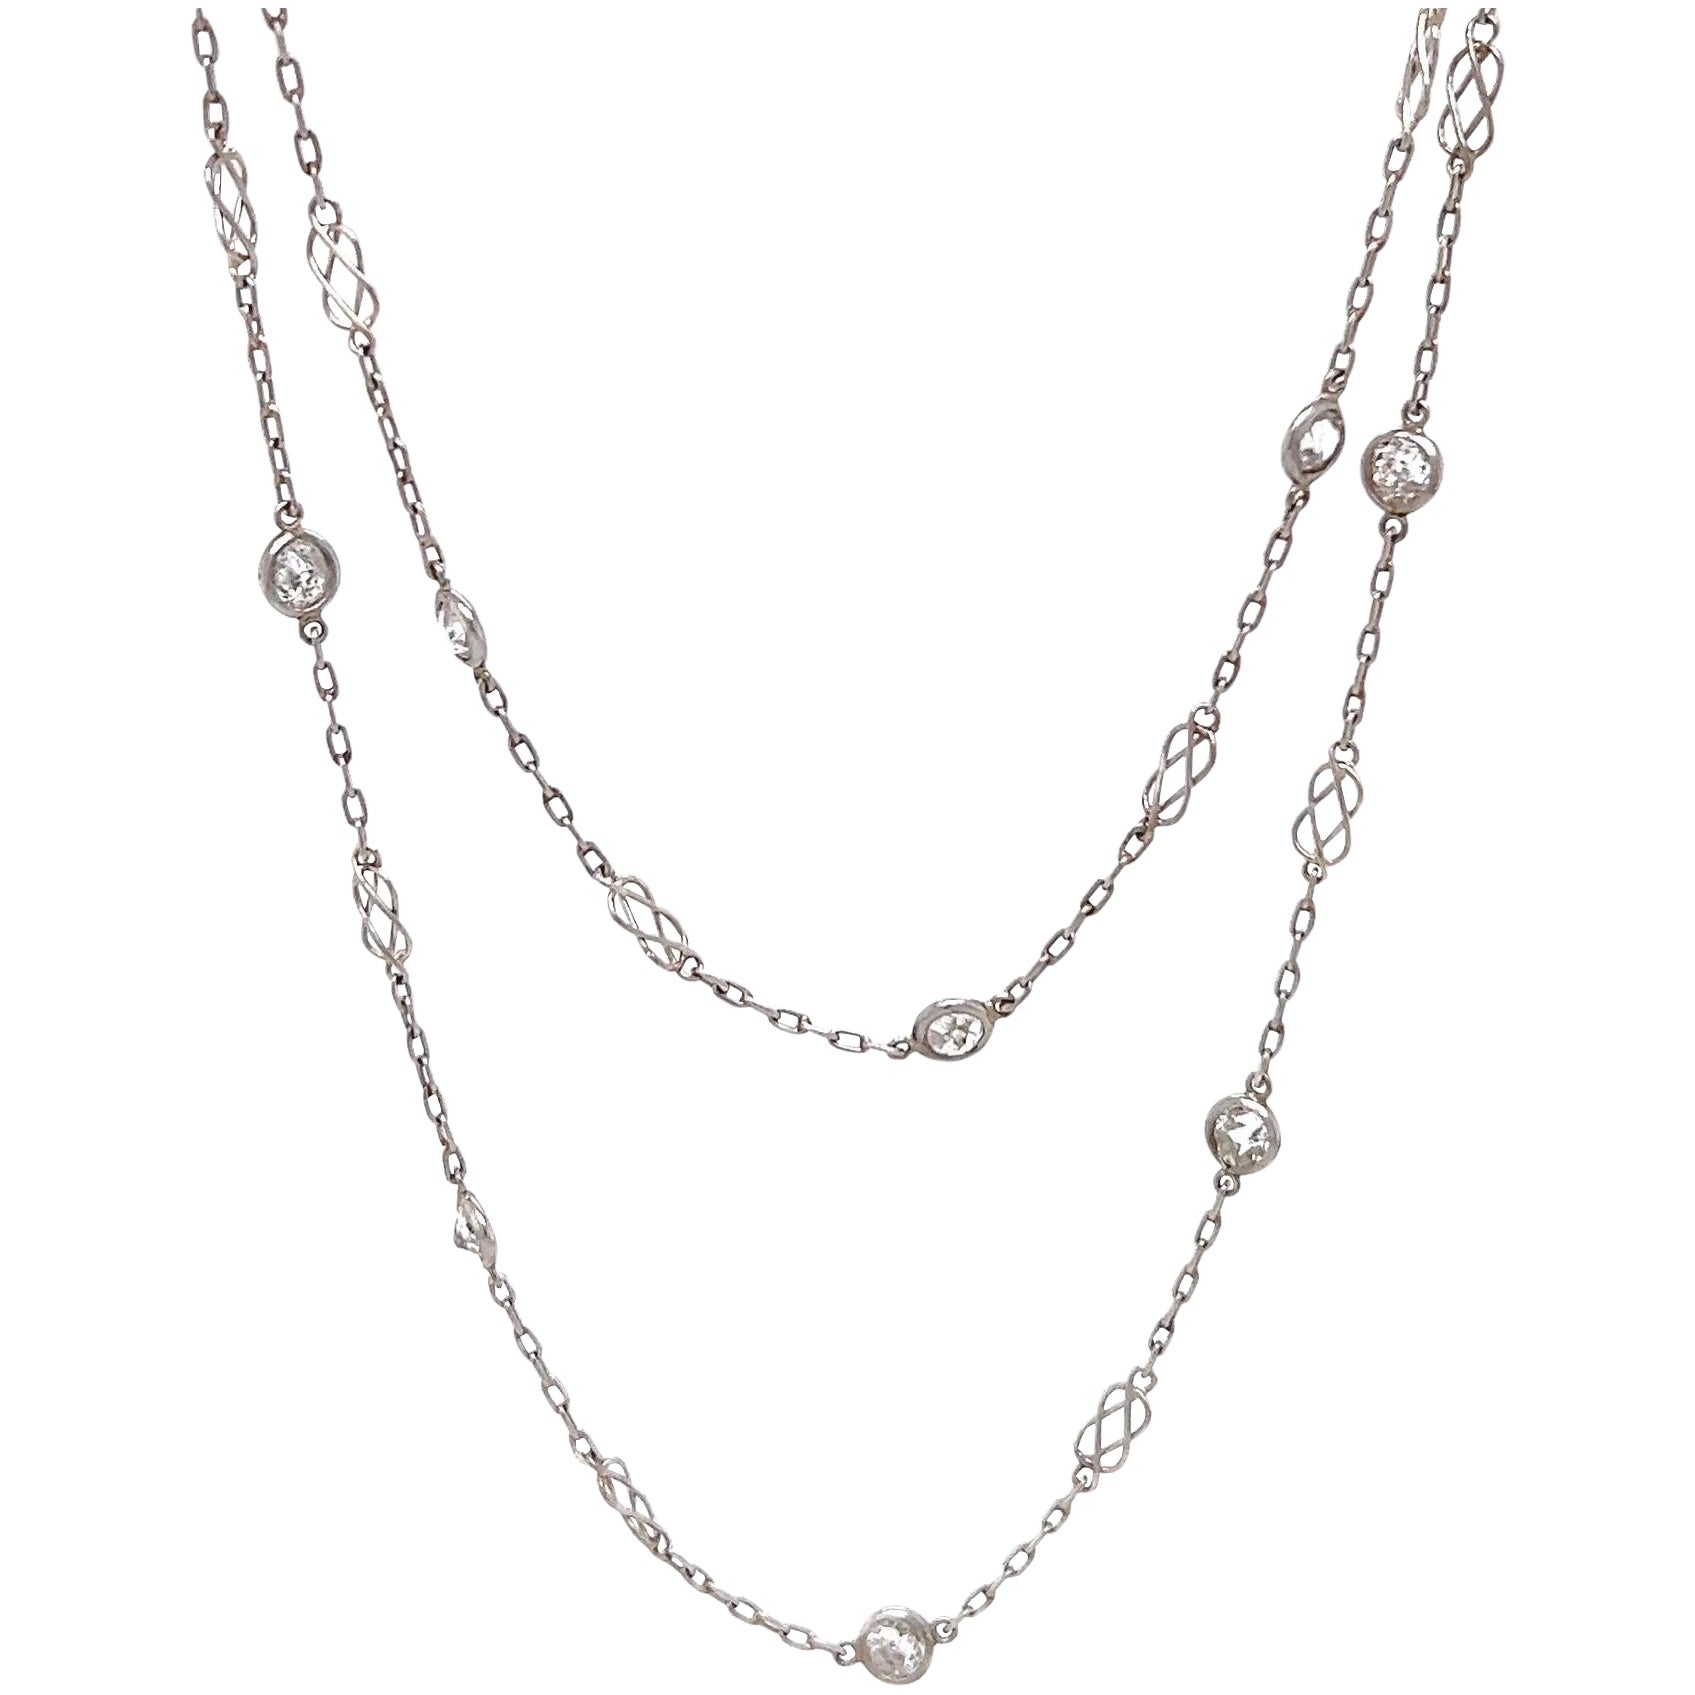 4.89 Carats Old European Cut Diamonds by the Yard Platinum Necklace For Sale